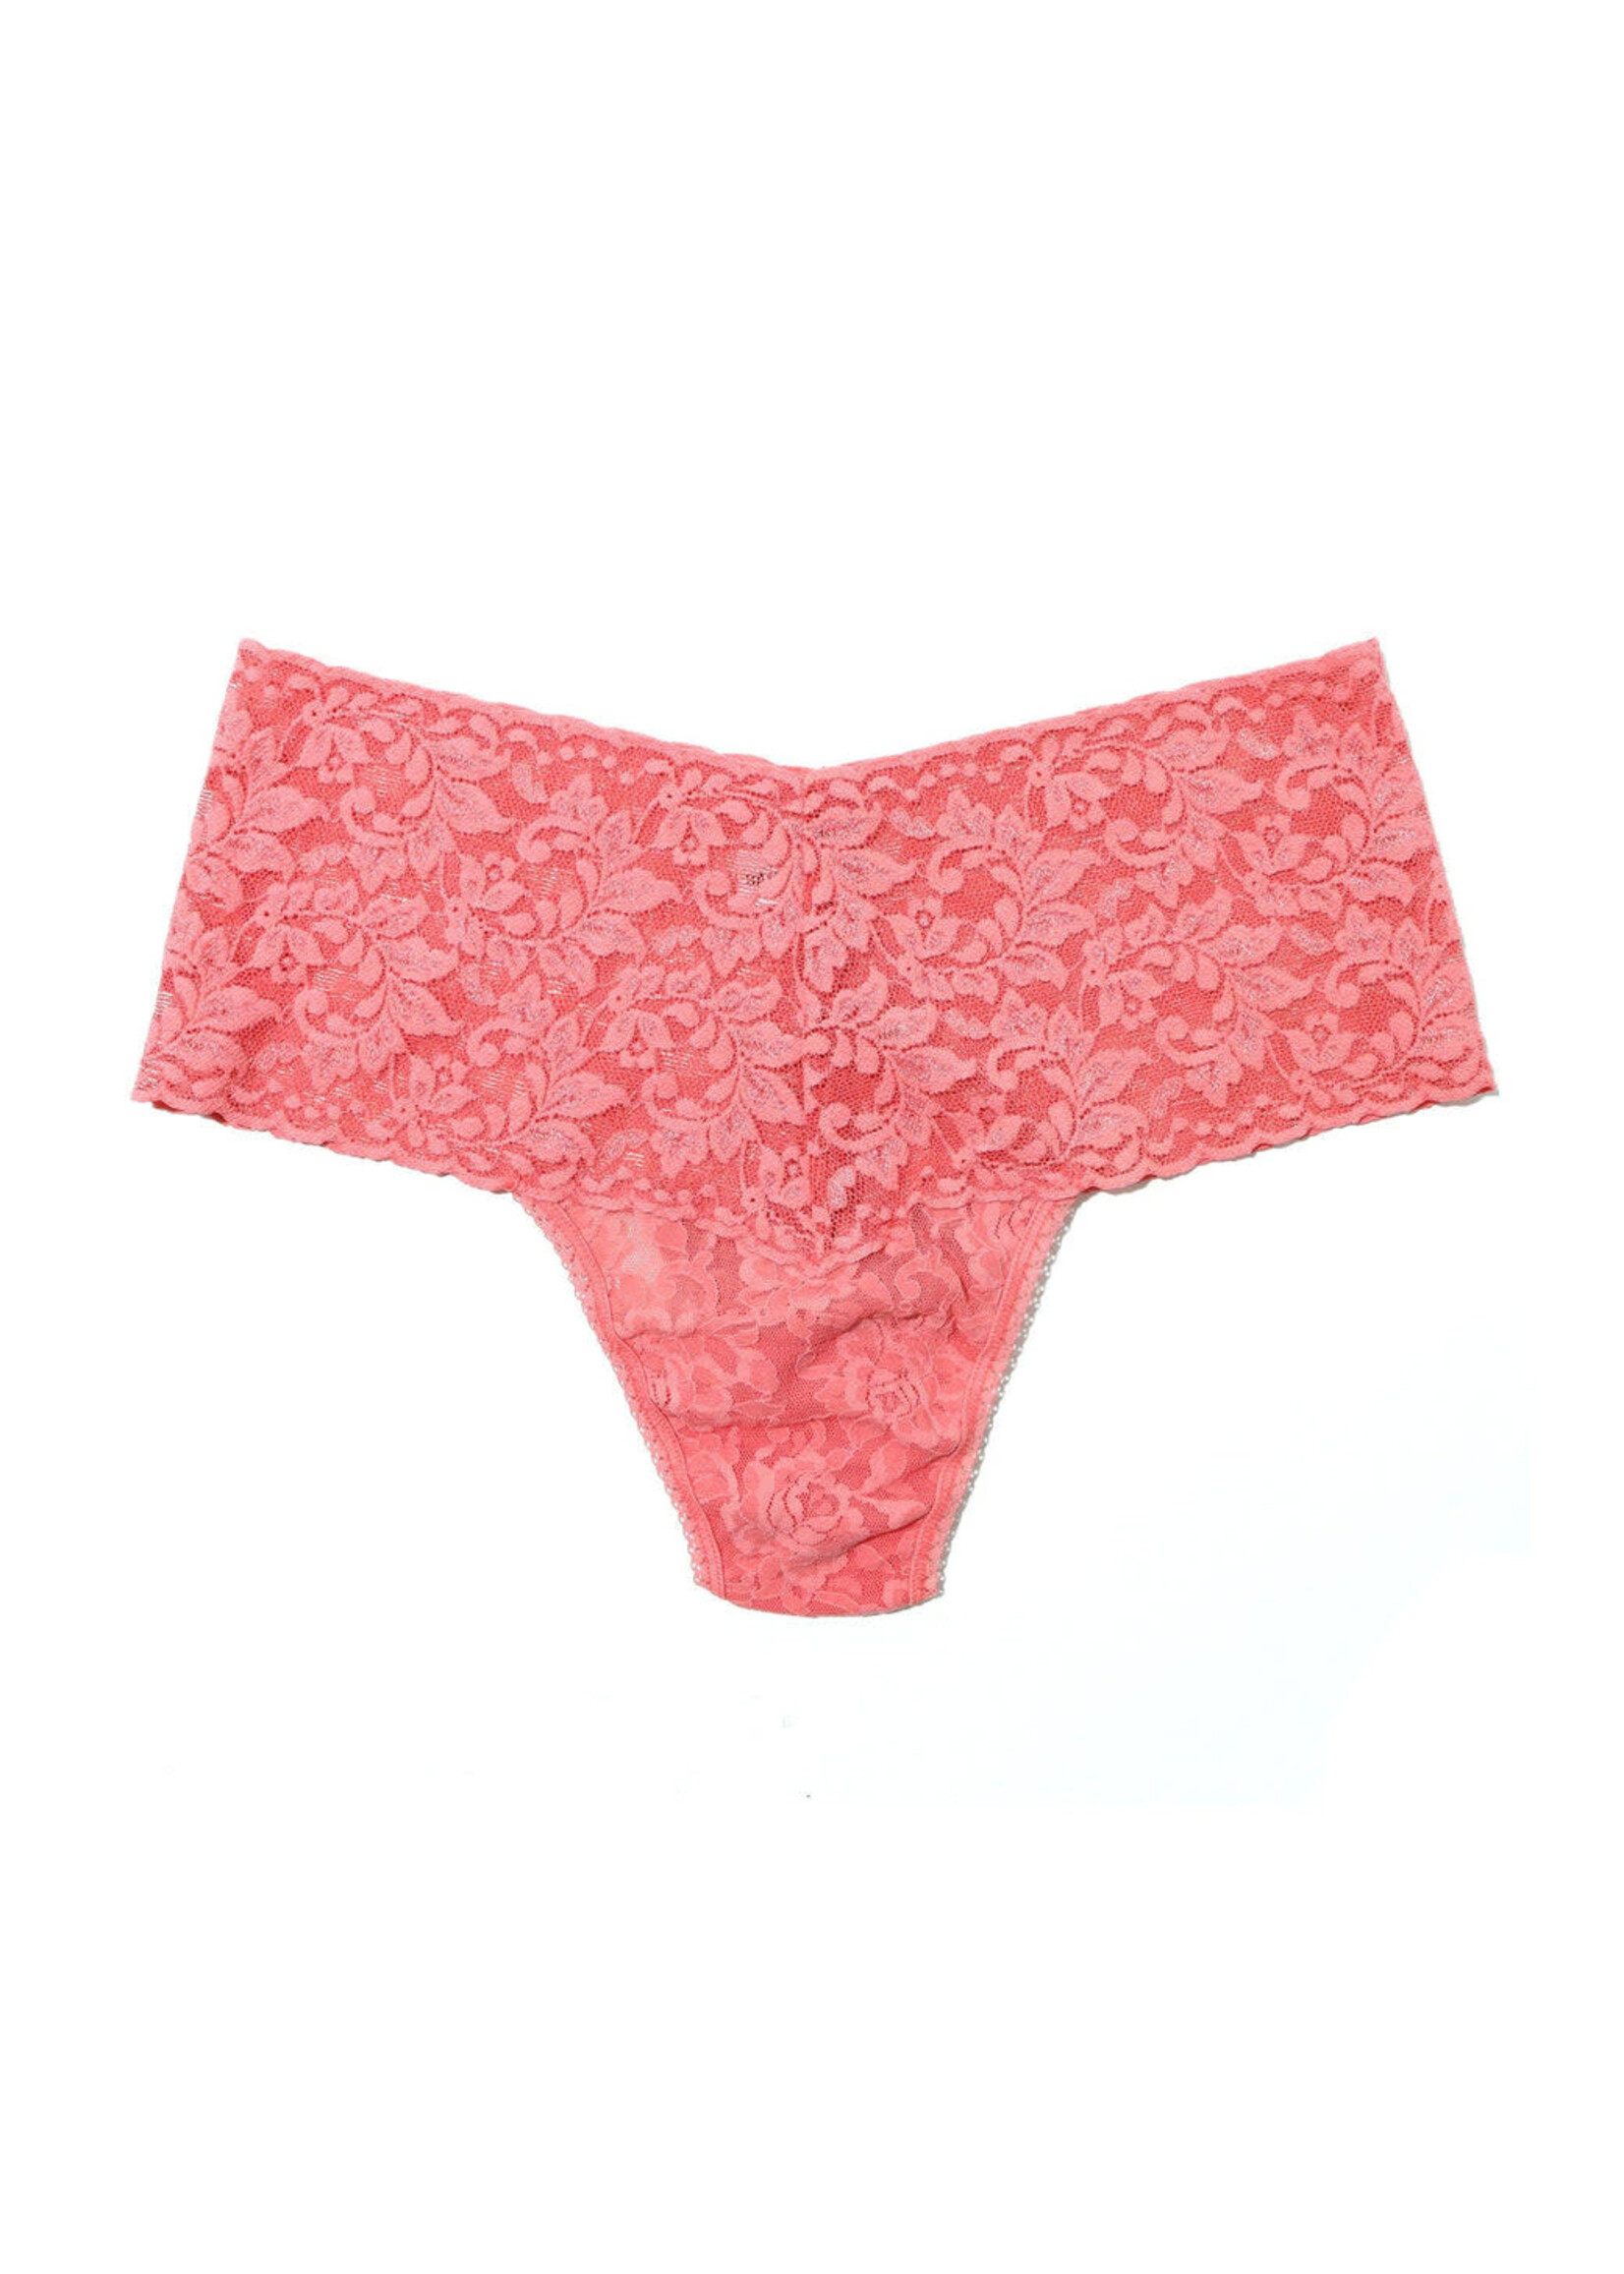 New Hanky Panky Neon Pink And Yellow Lace Thong Underwear Style